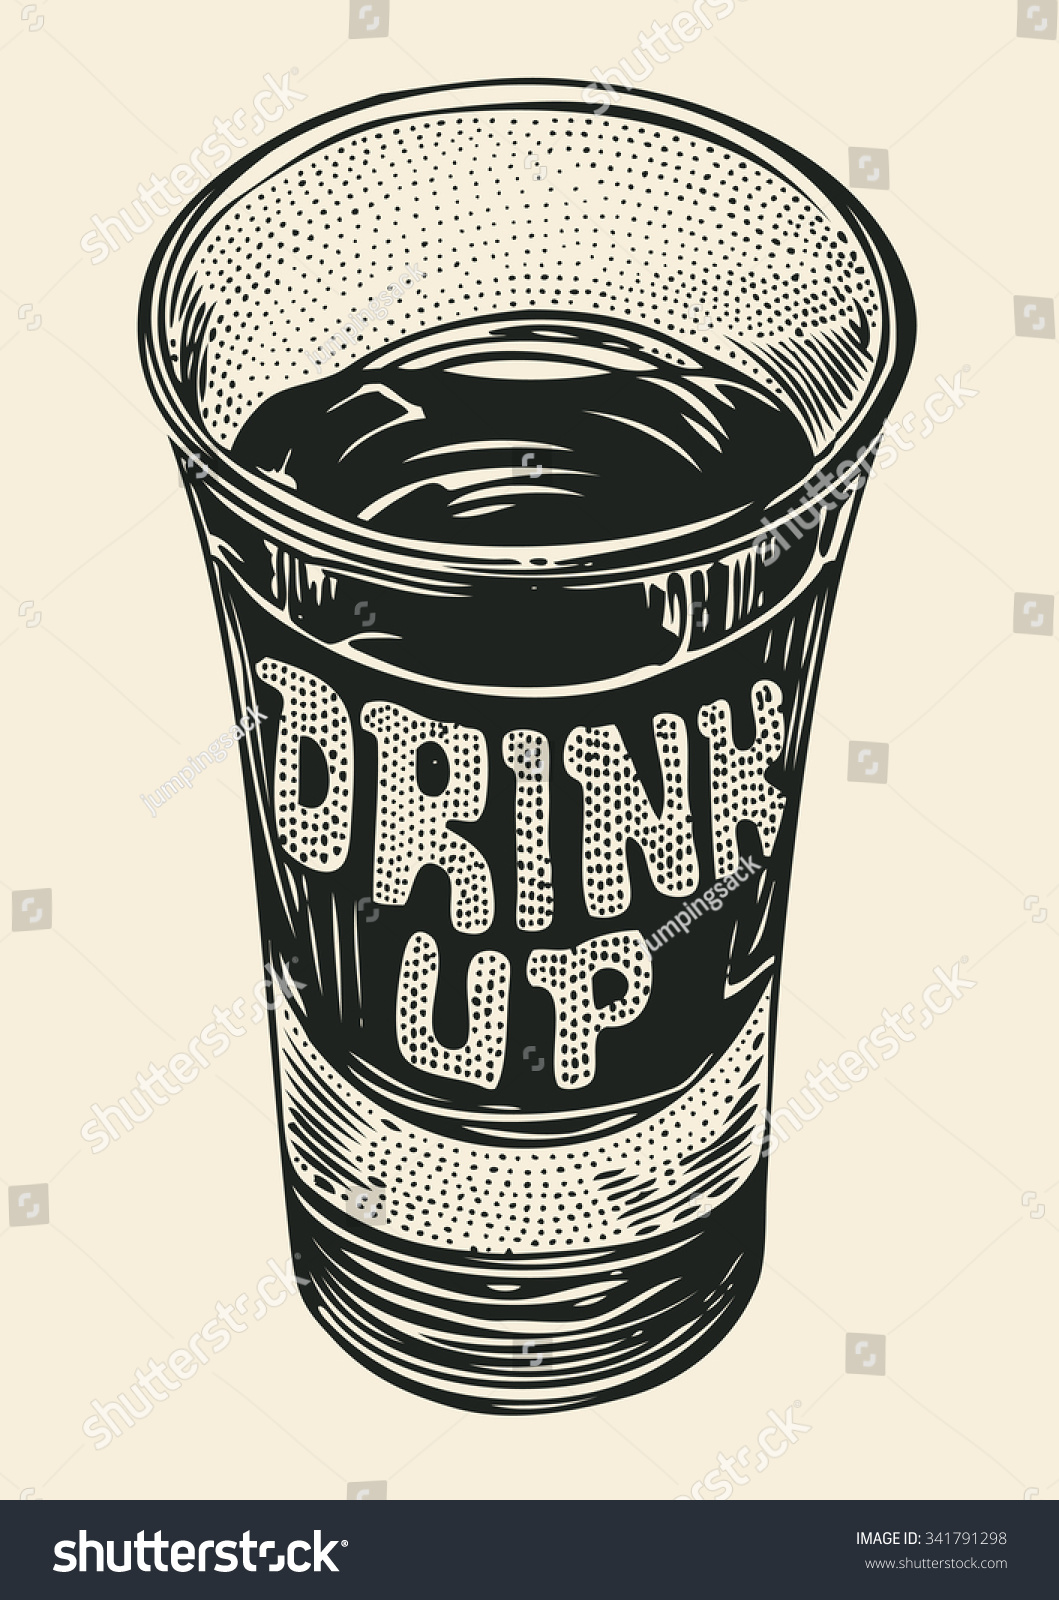 stock-vector-shot-of-alcohol-strong-drink-hand-drawn-design-element-engraving-style-vector-illustration-341791298.jpg